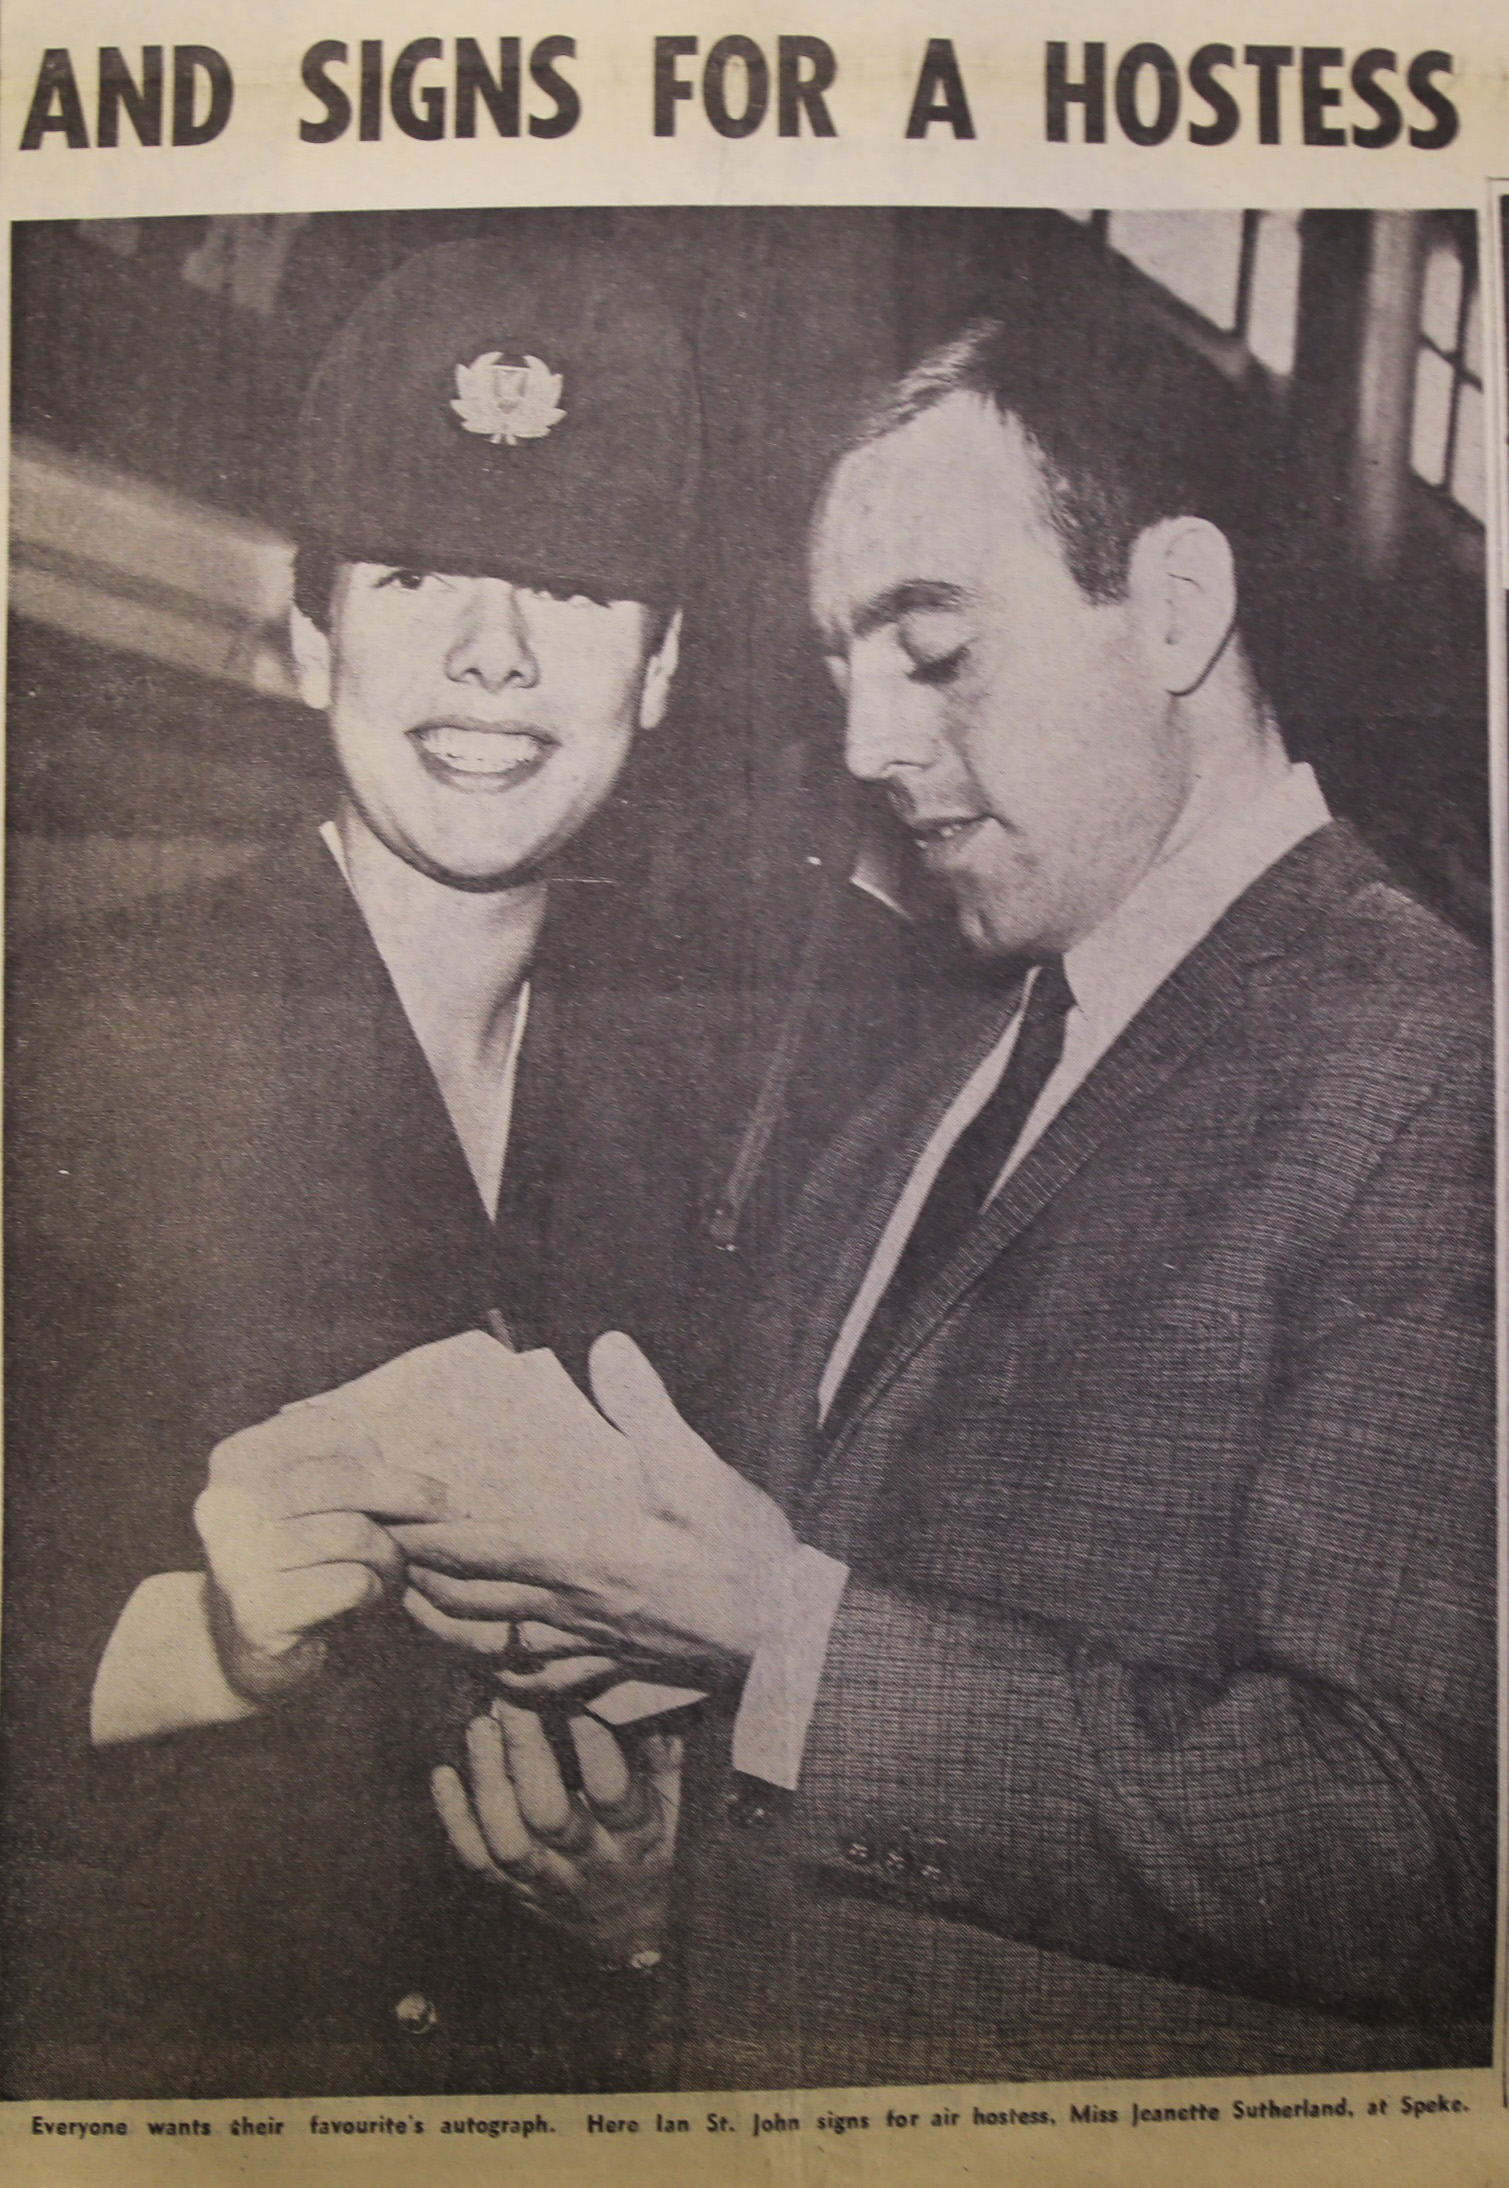 Signing for a hostess 1965